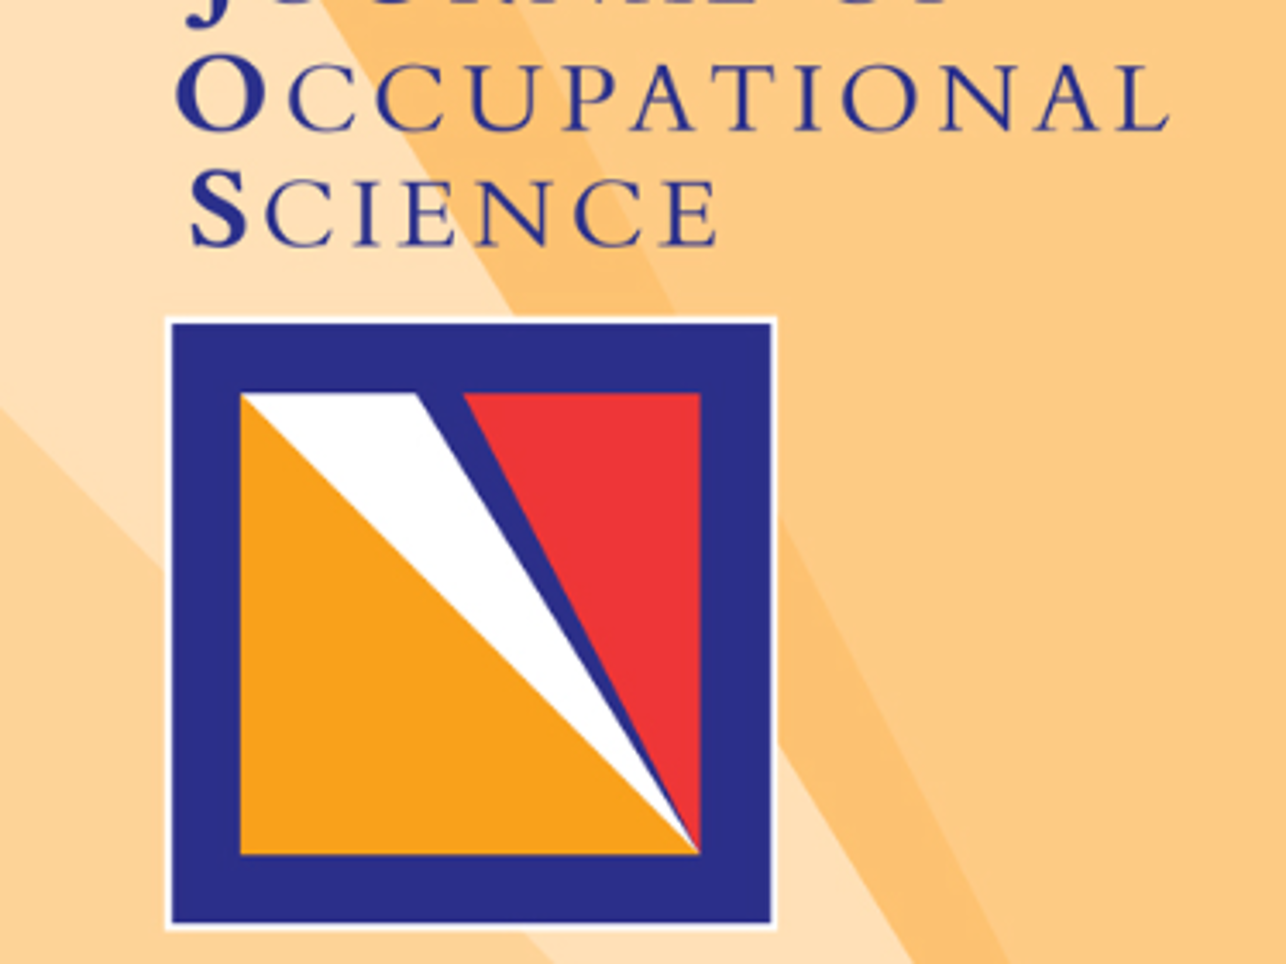 Journal of Occuaptional Science